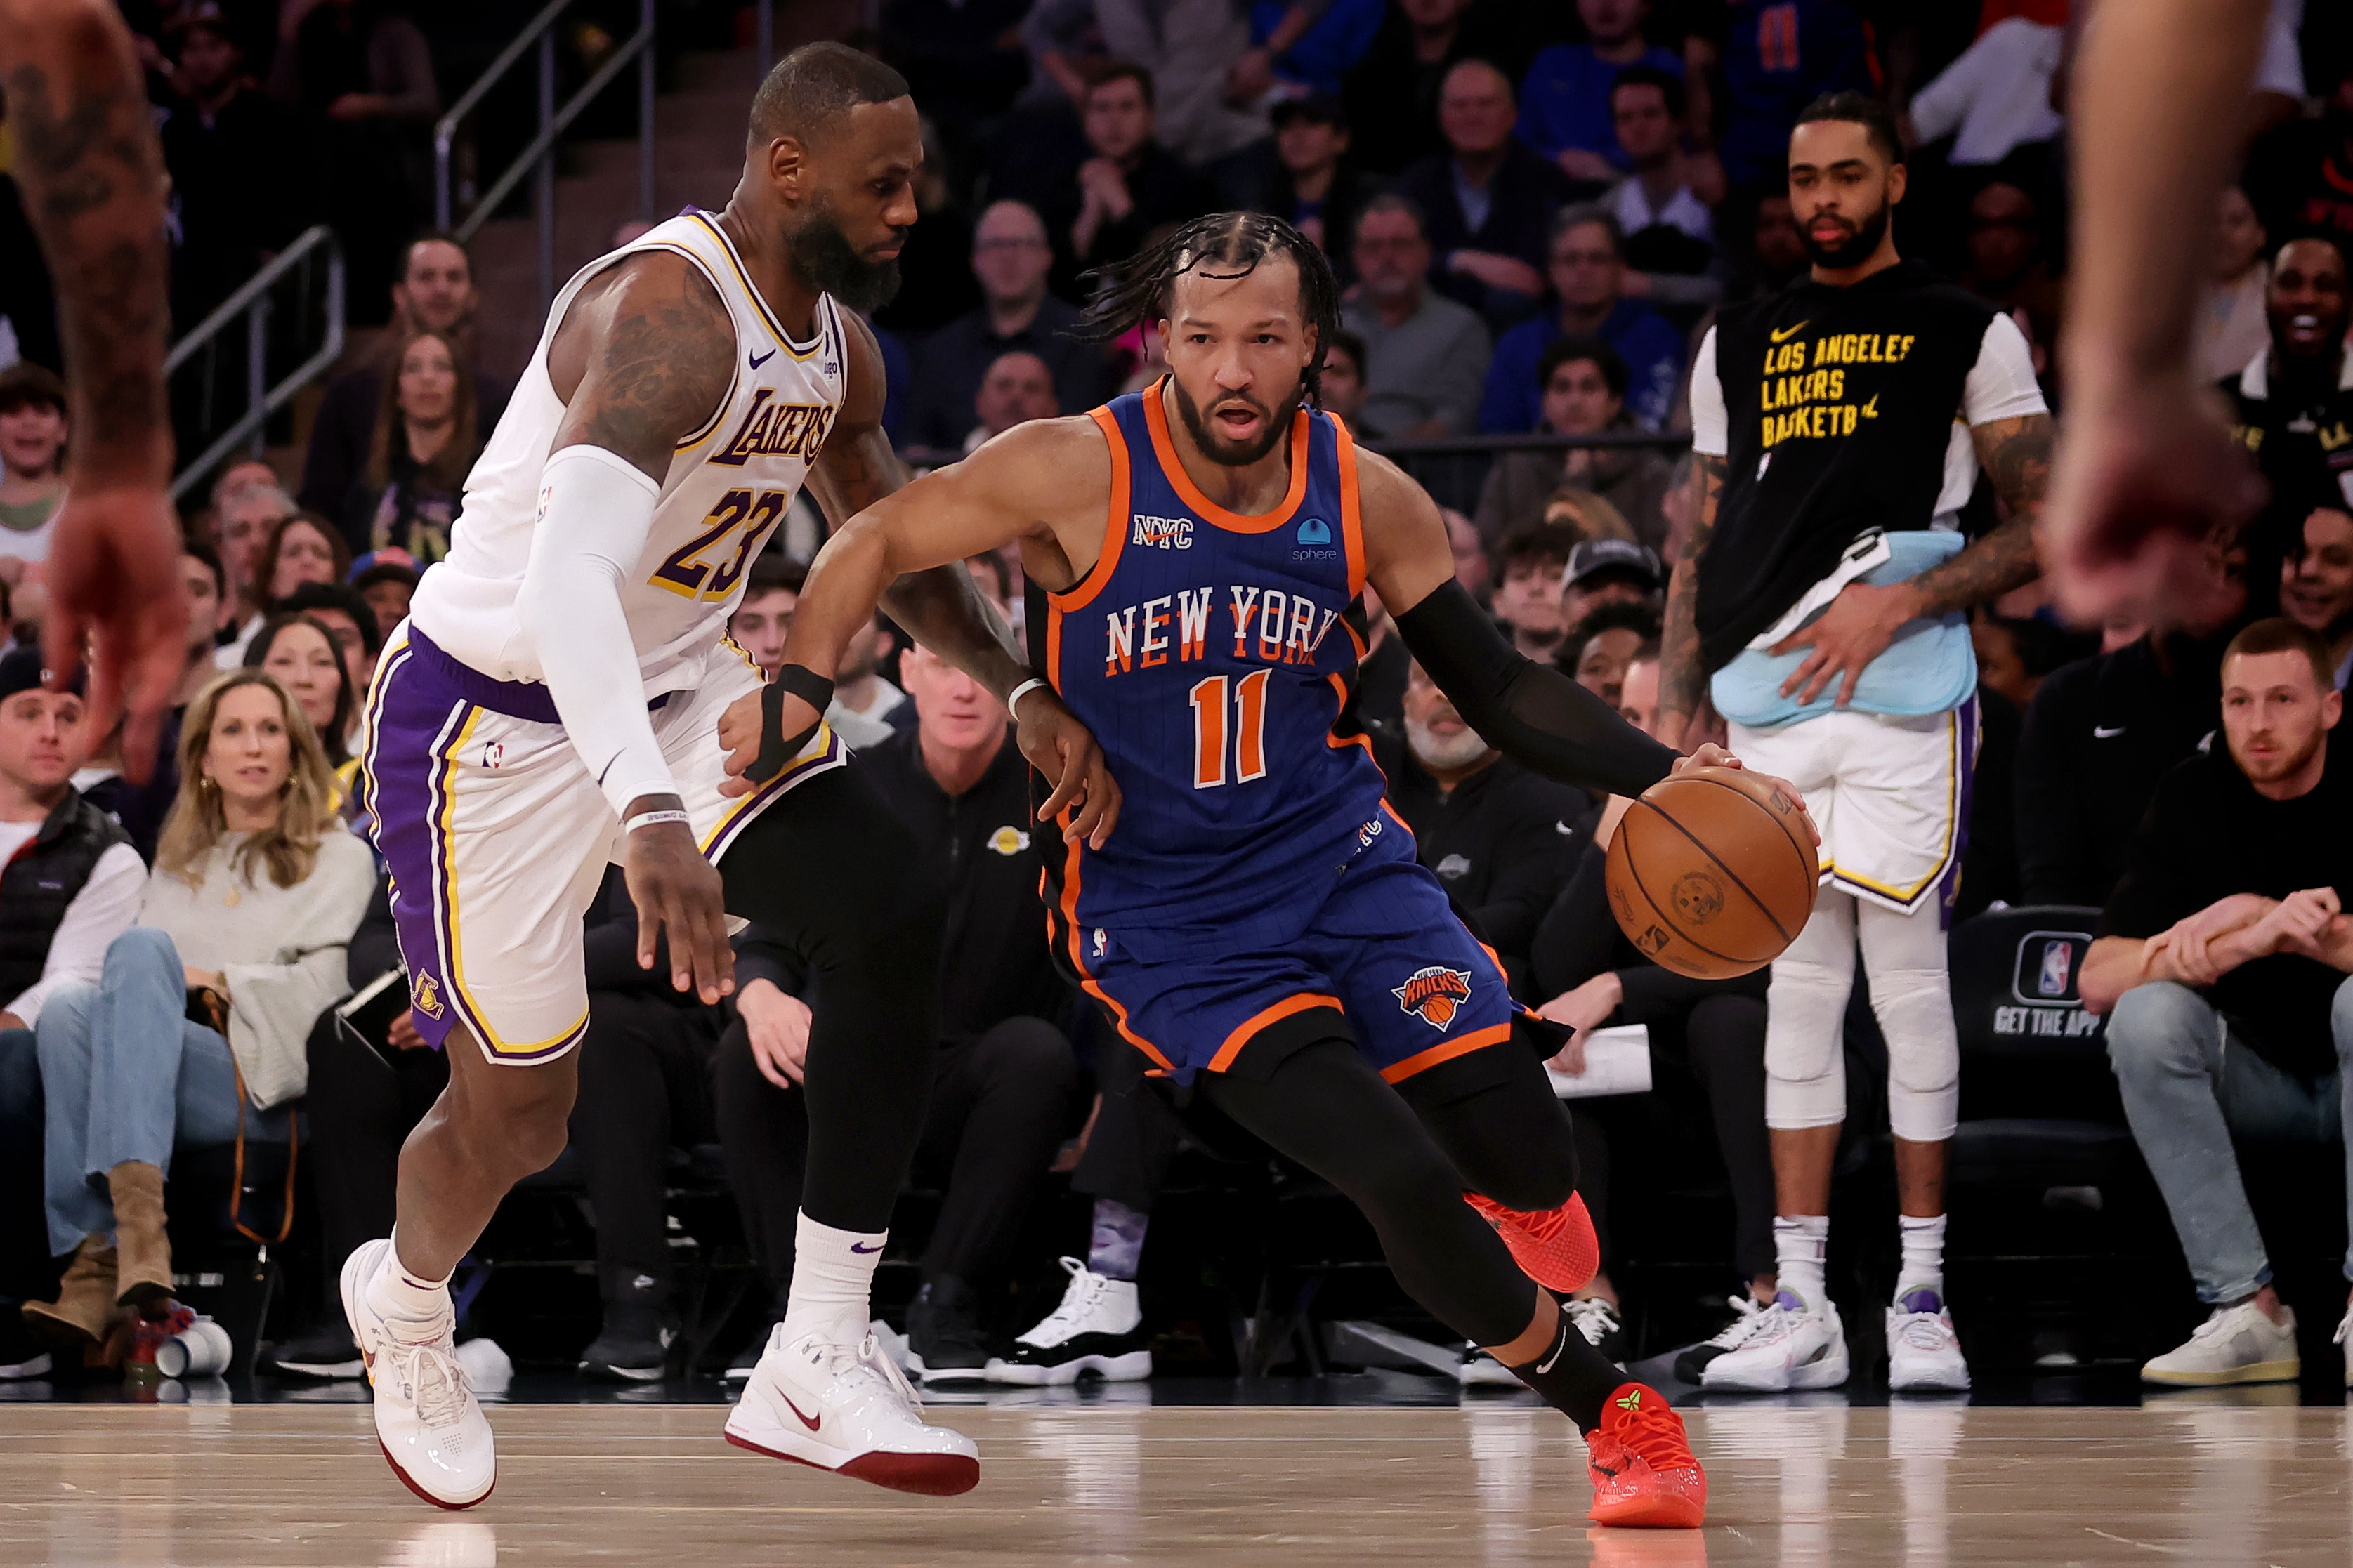 Knicks have another hole to fill with Jalen Brunson out against